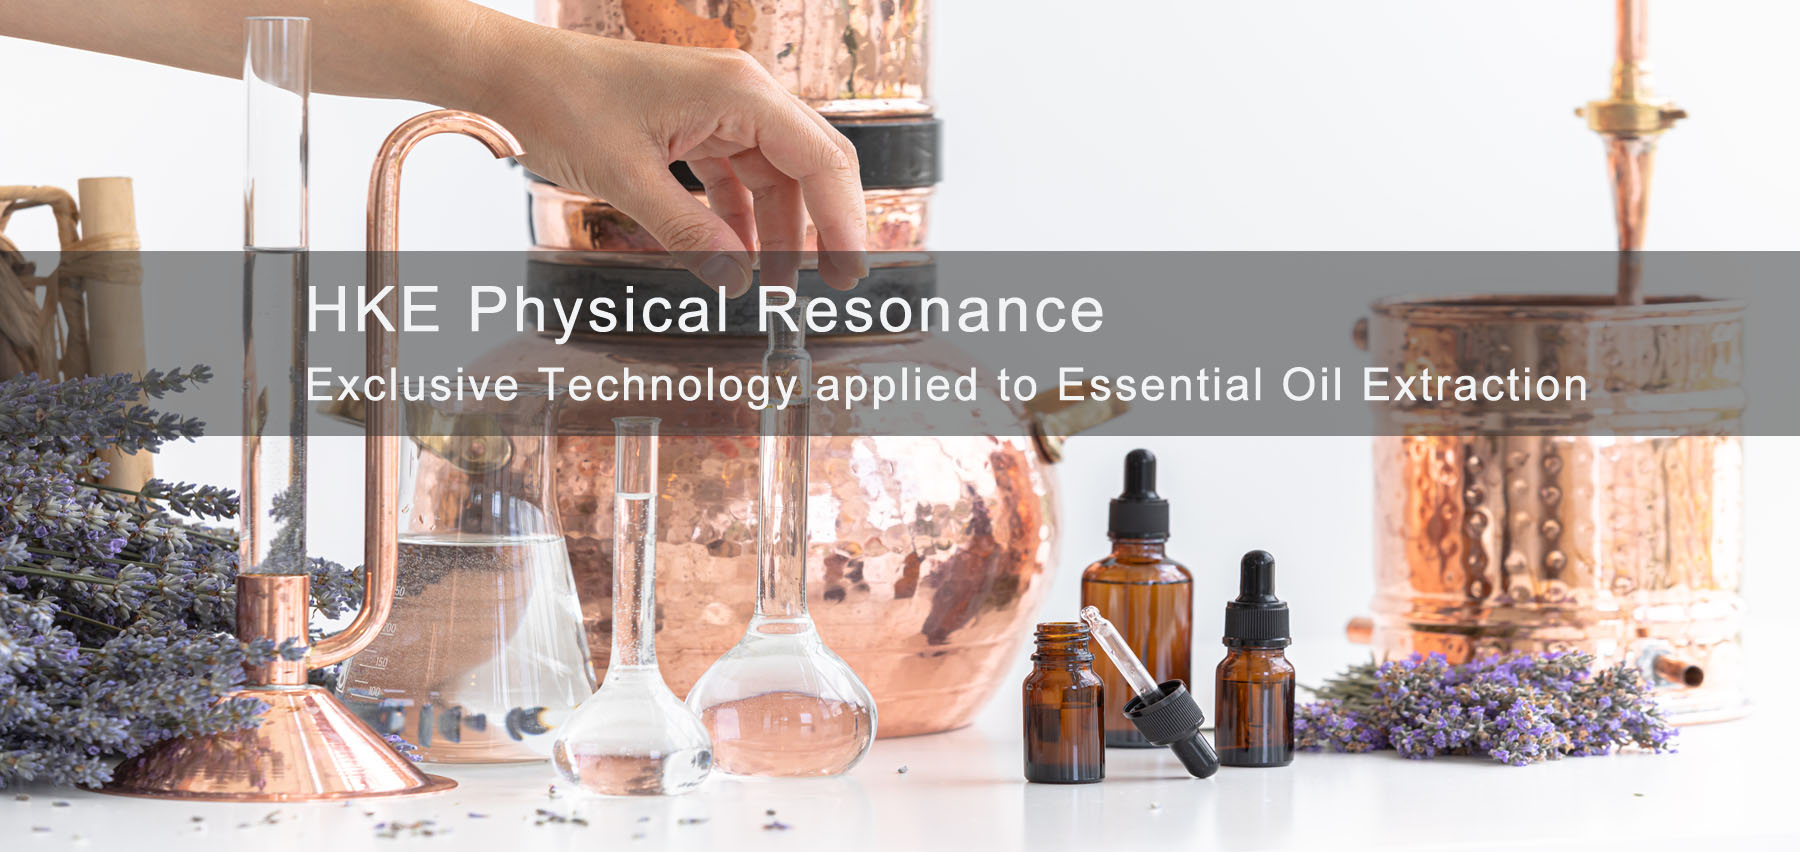 Innovative Essential Oil Extraction with HKE Physical Resonance Technology